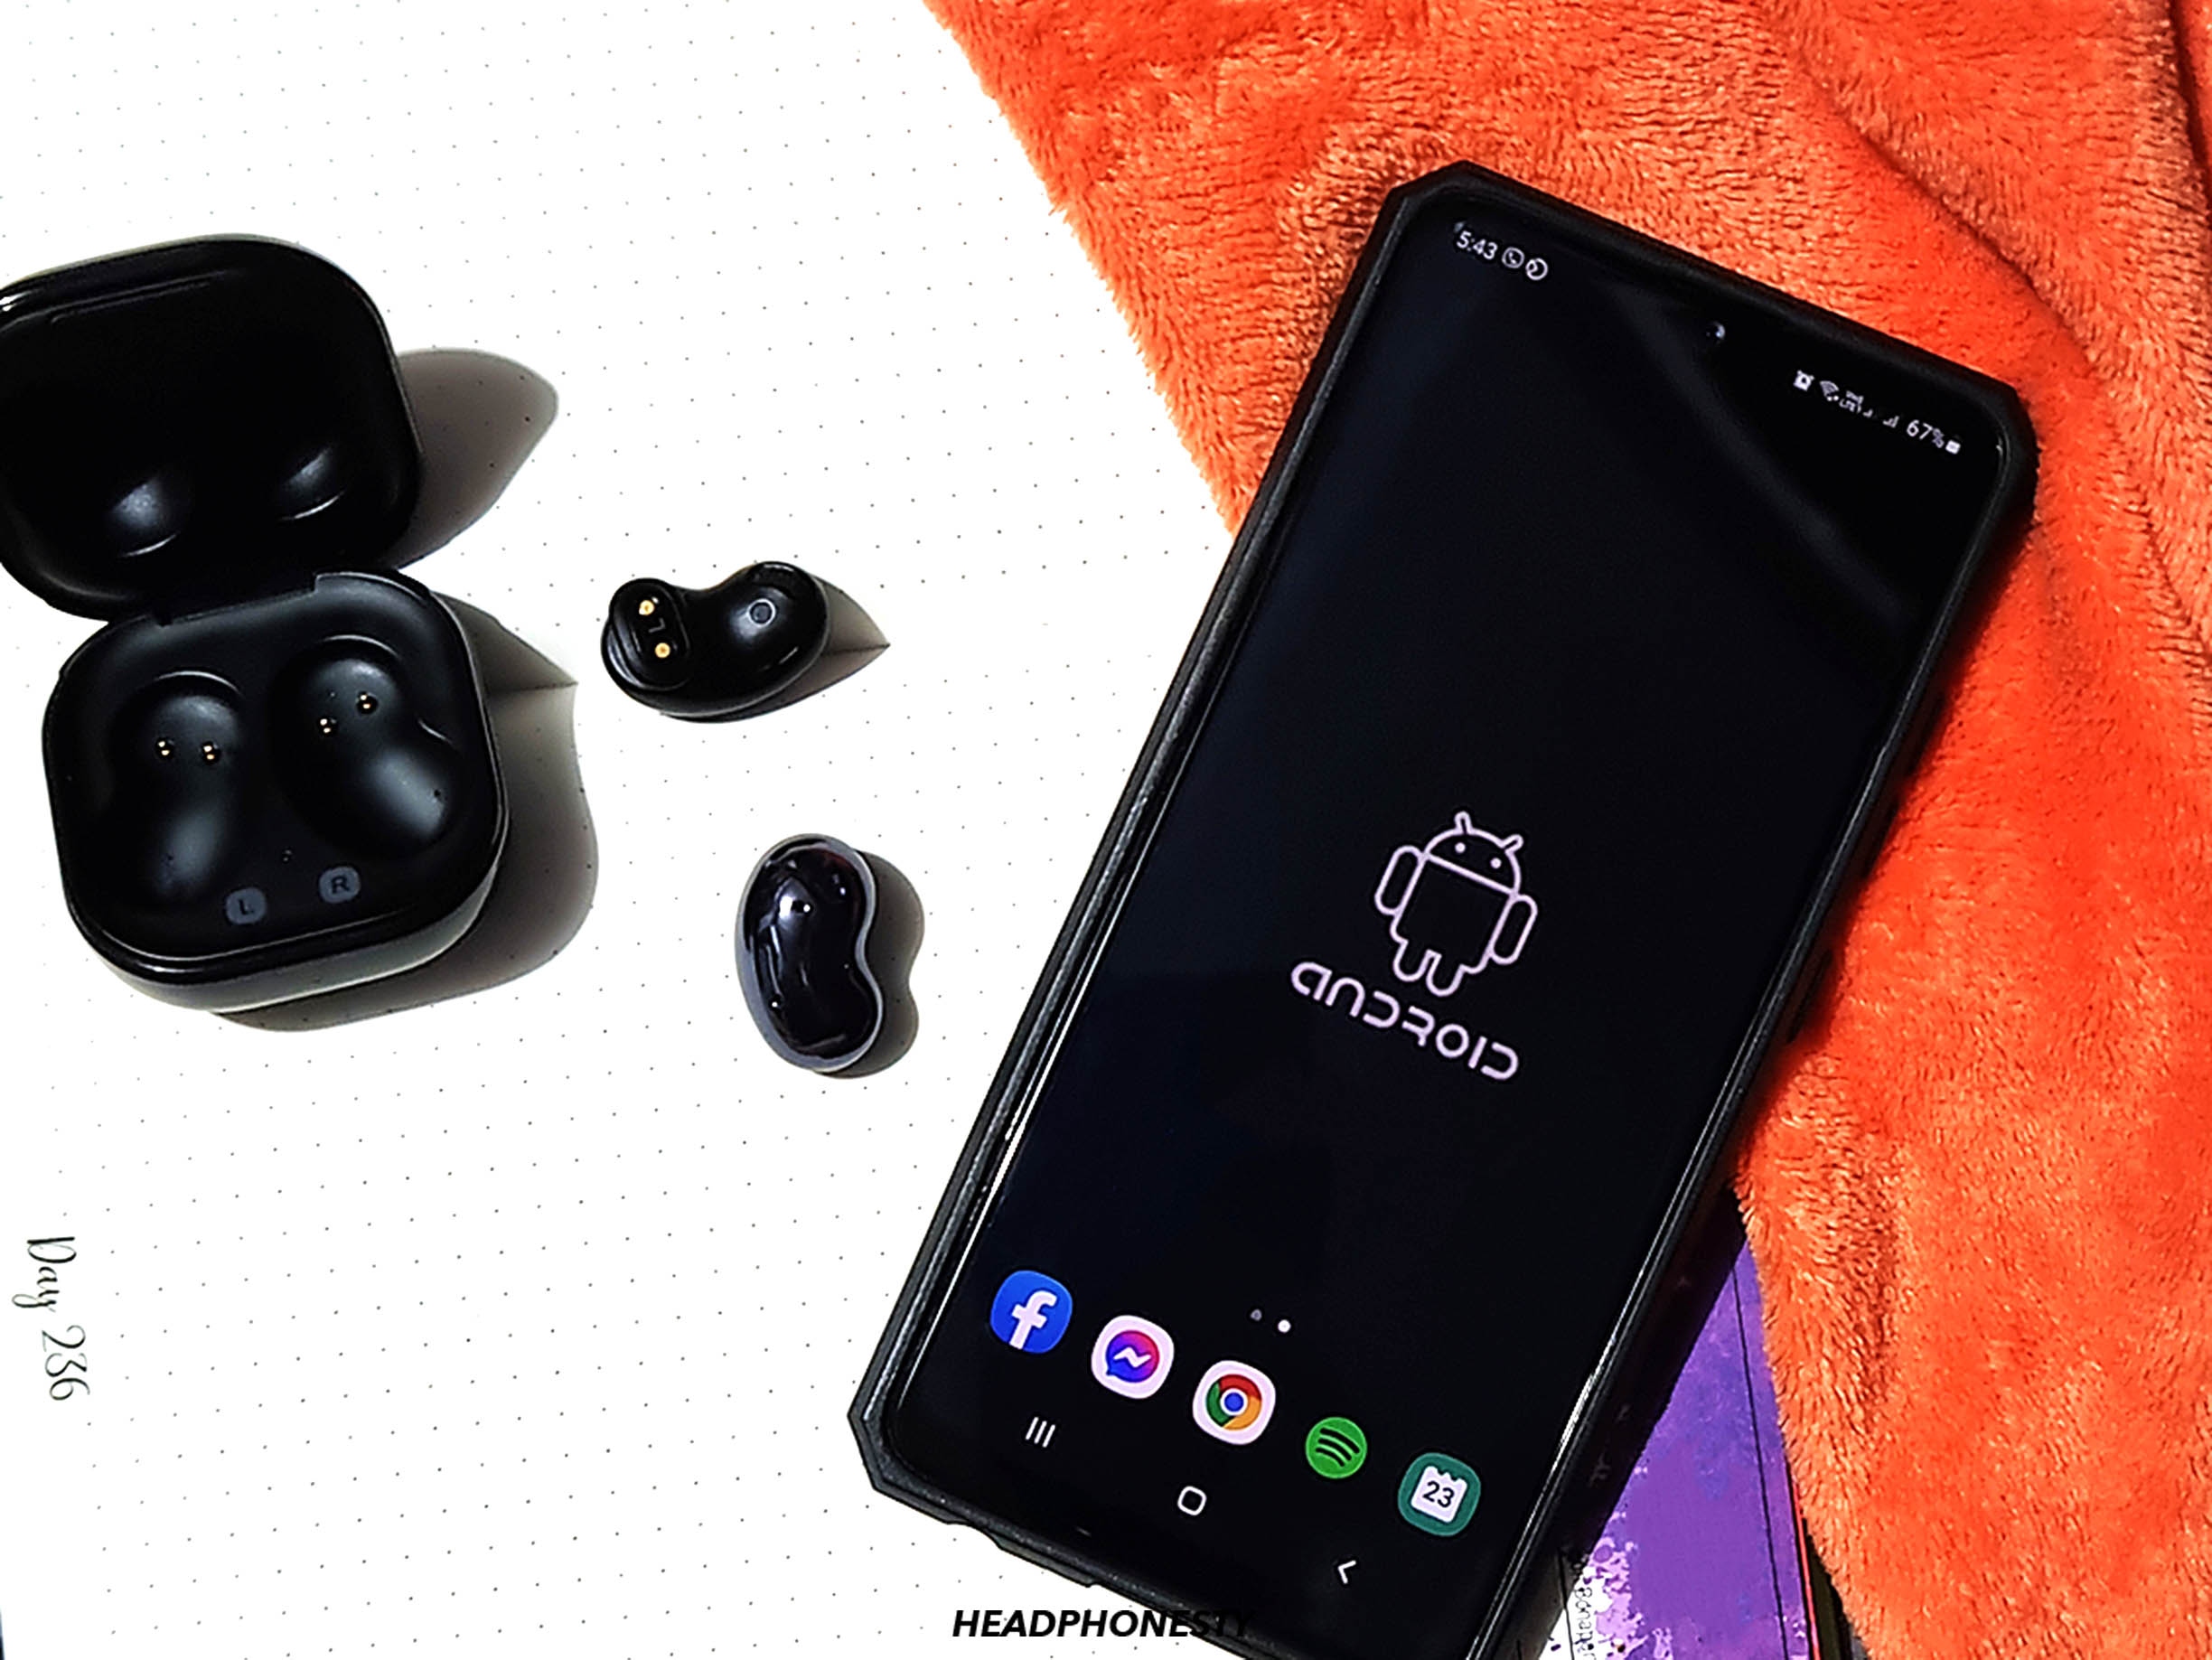 True wireless earbuds and Android phone